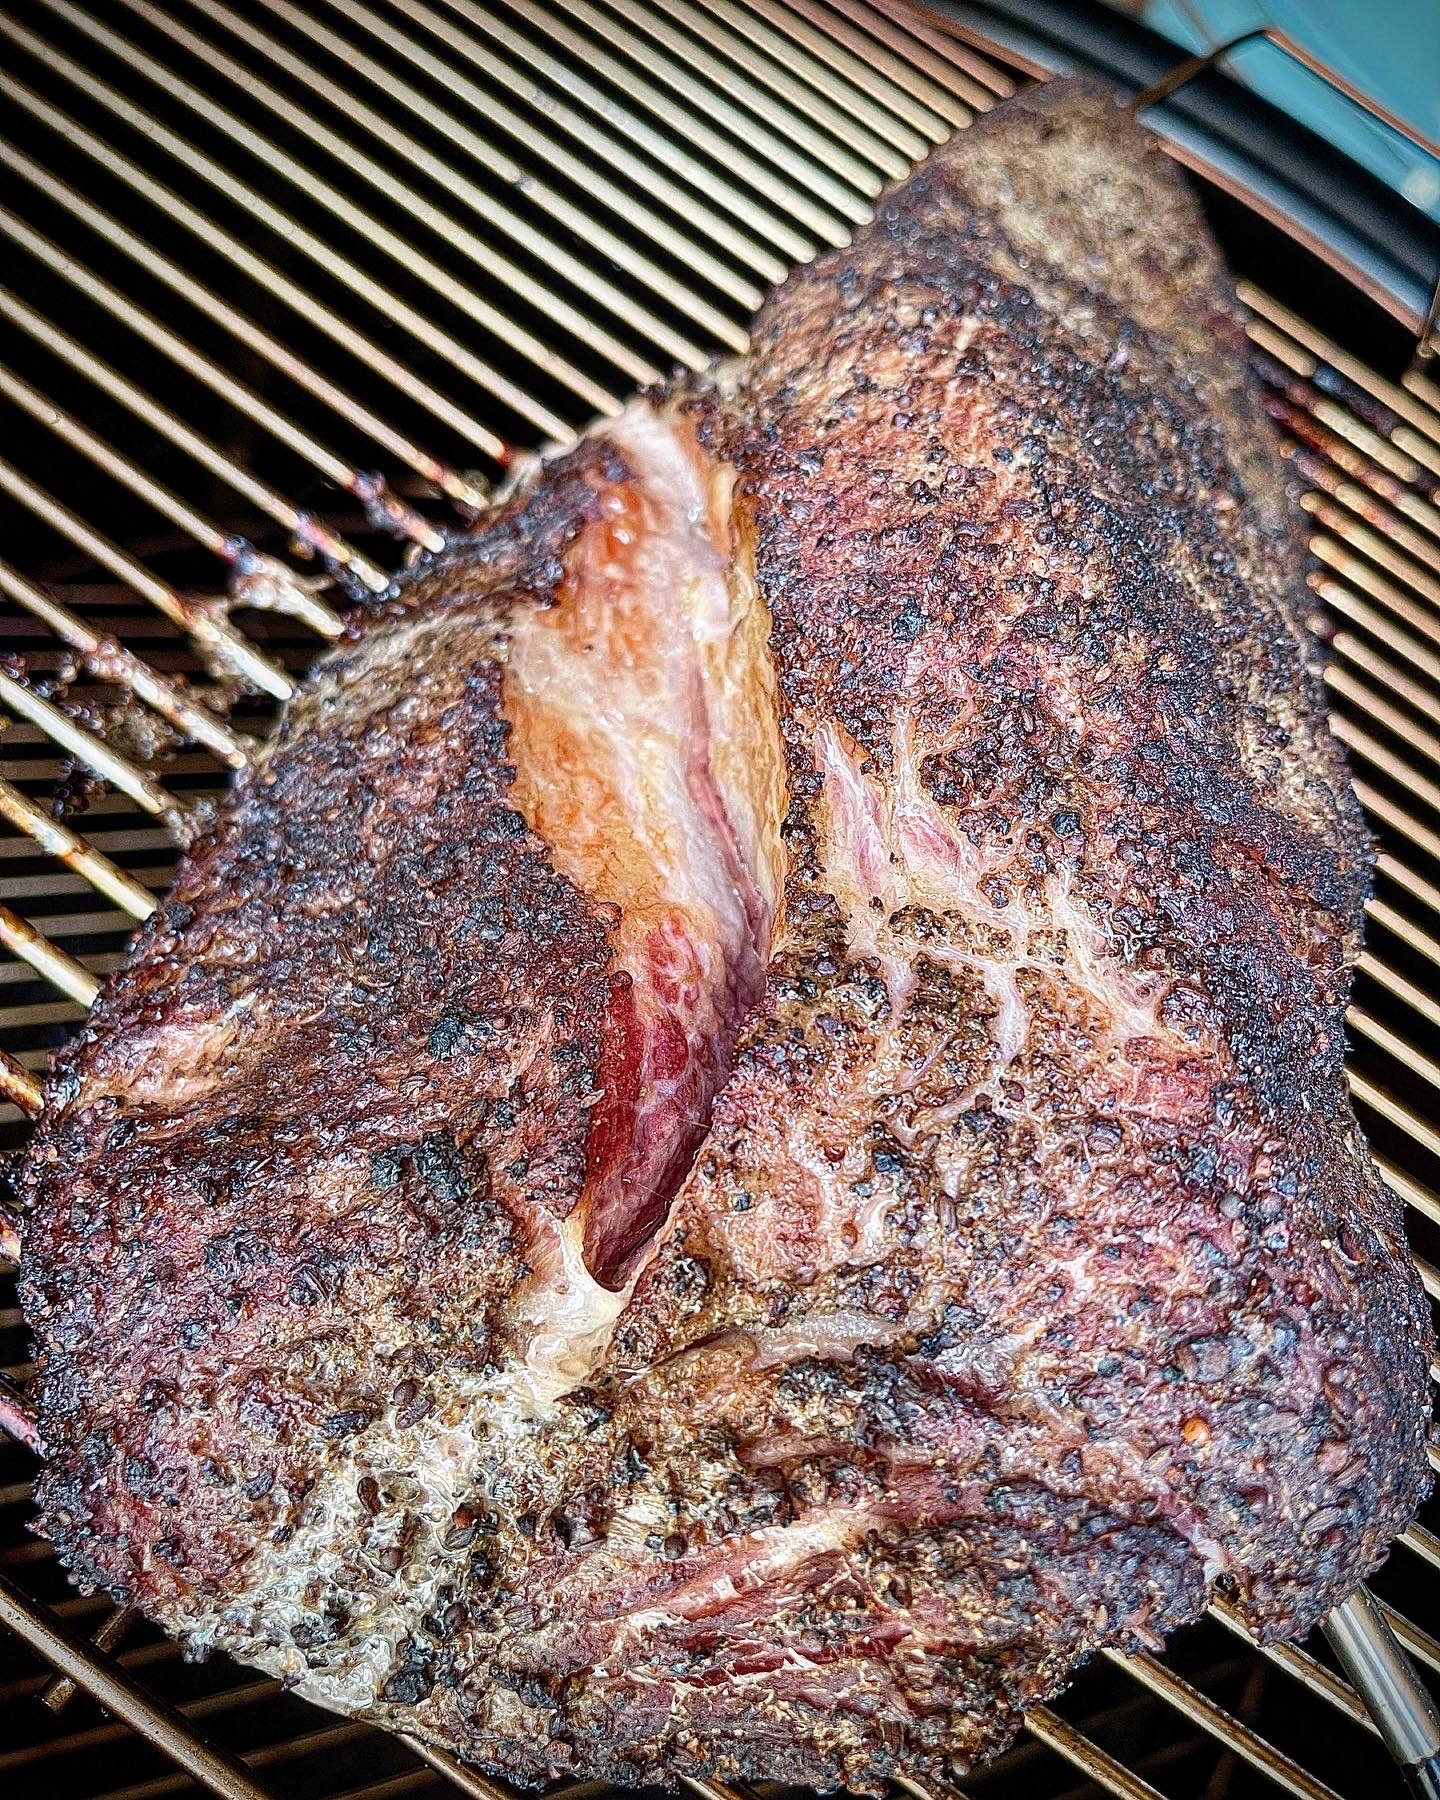 Image of get your smoker up to 275F/135C and smoke the brisket...